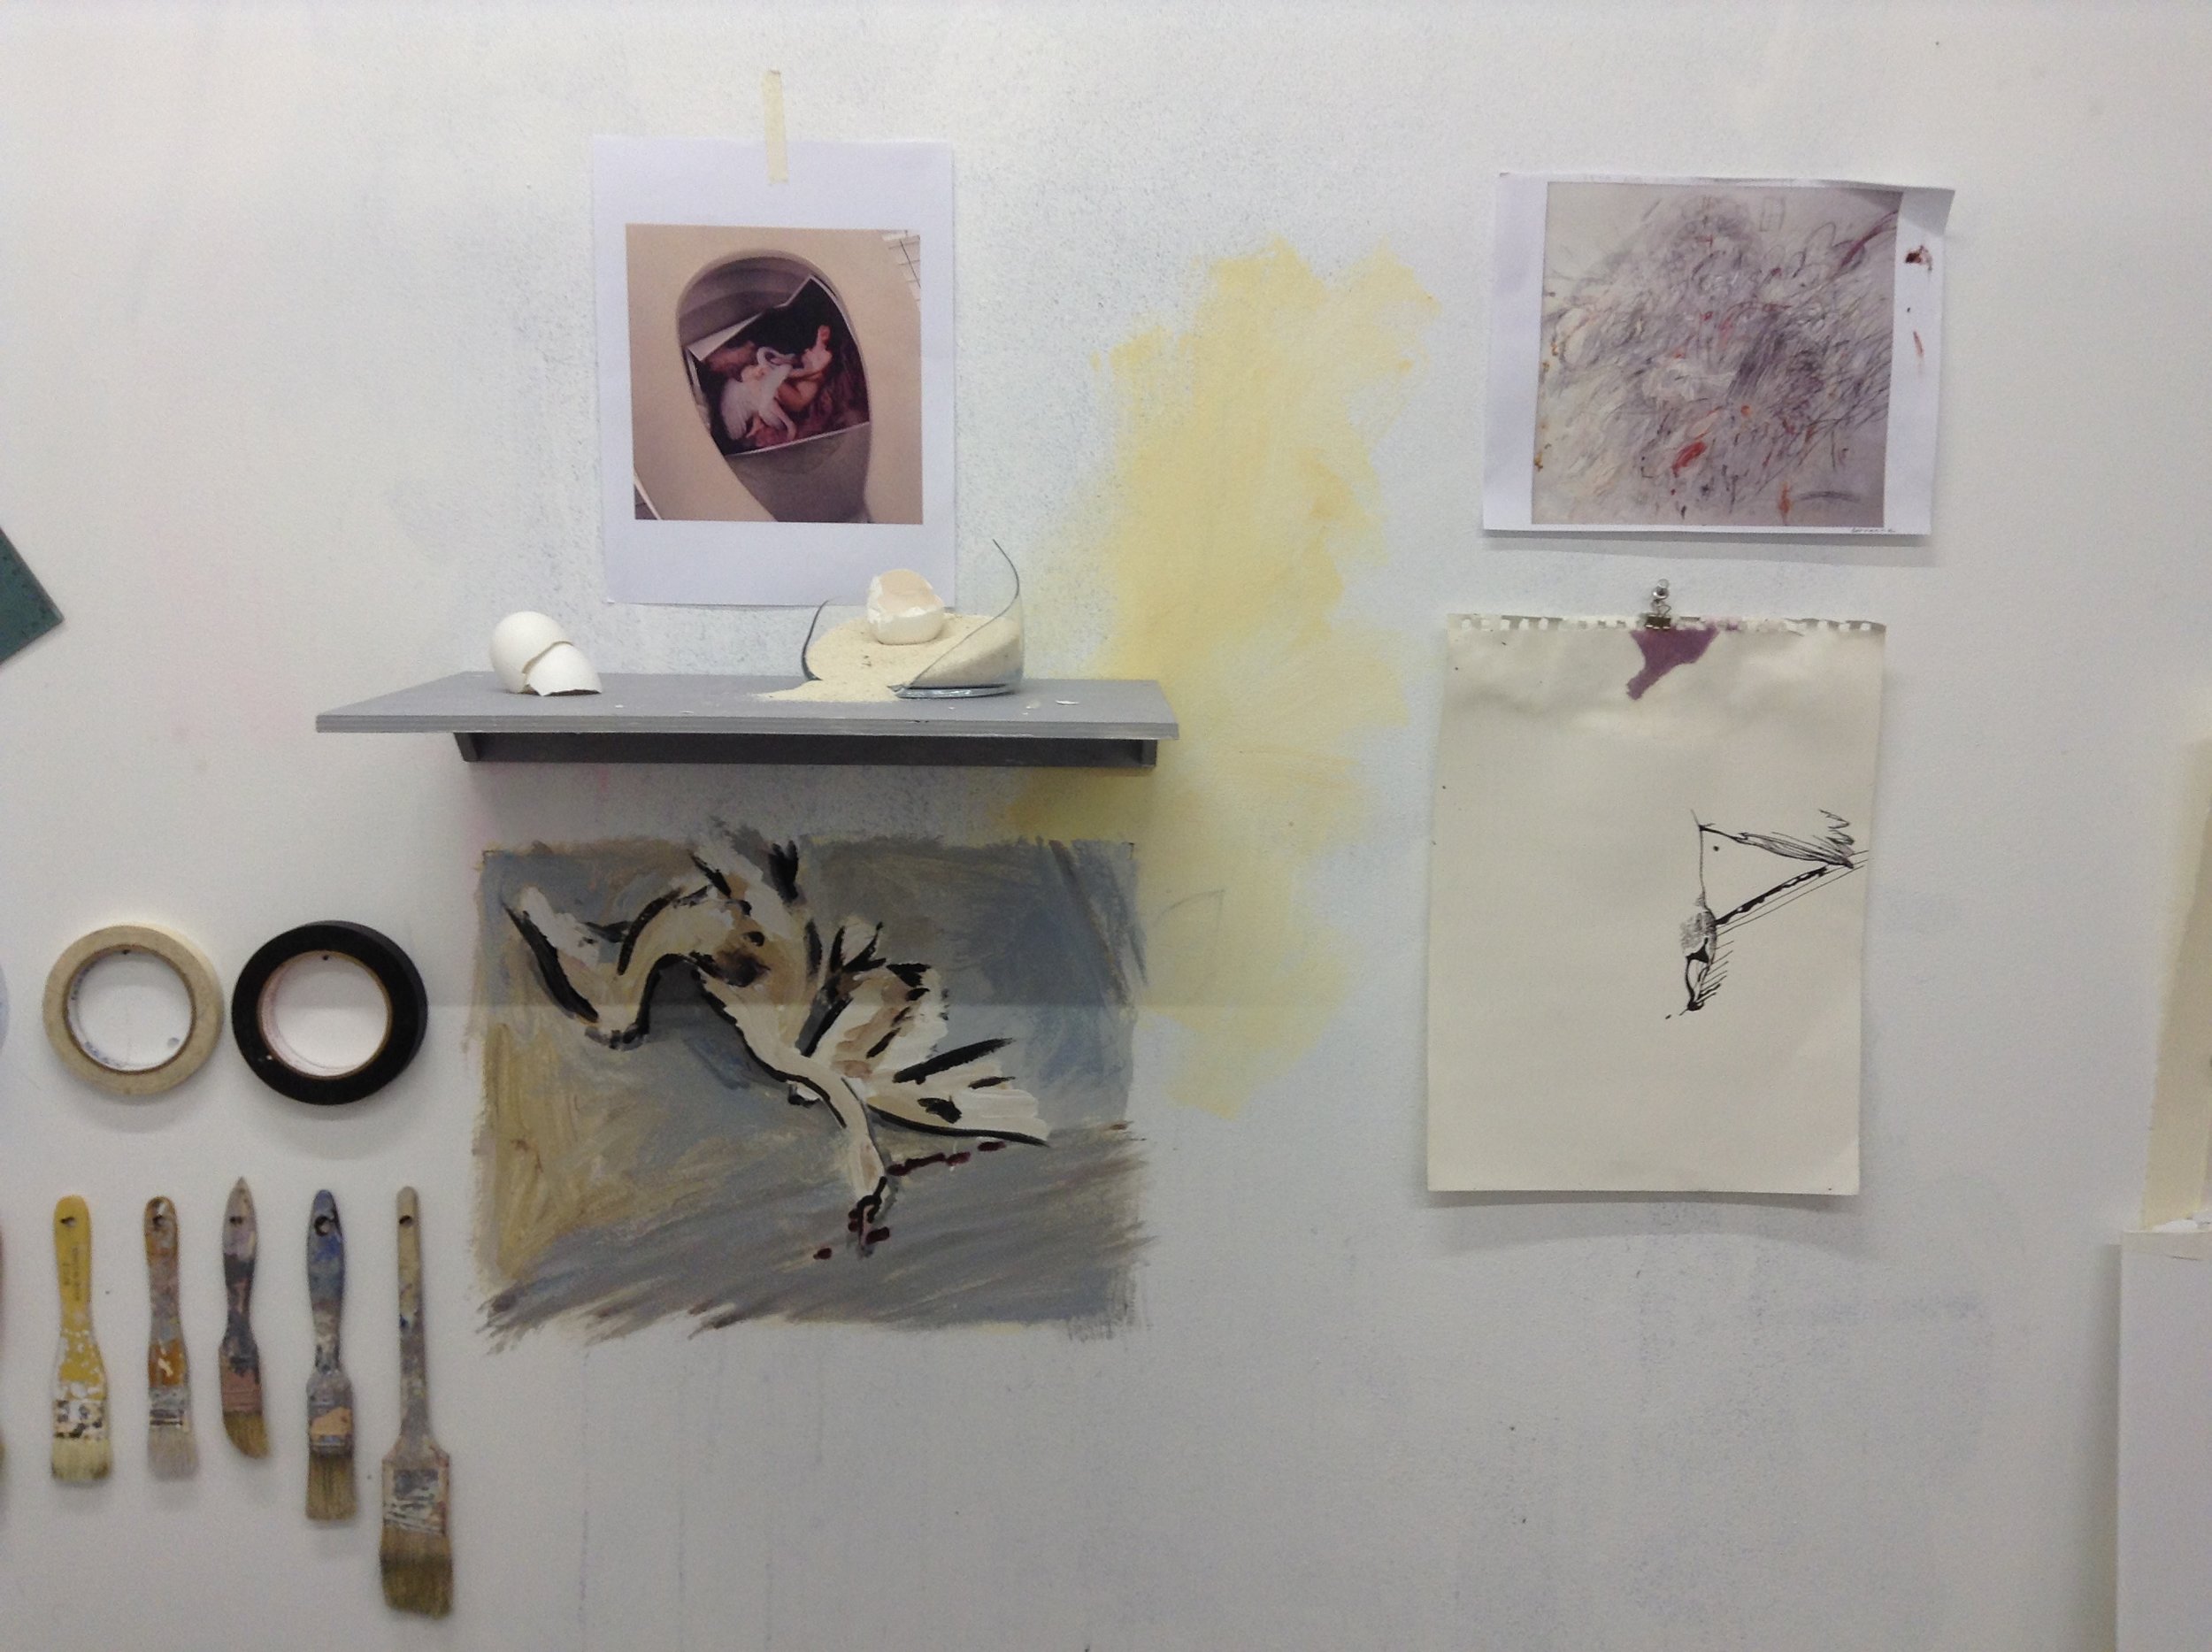  work in progress in studio / during research and pre-production 